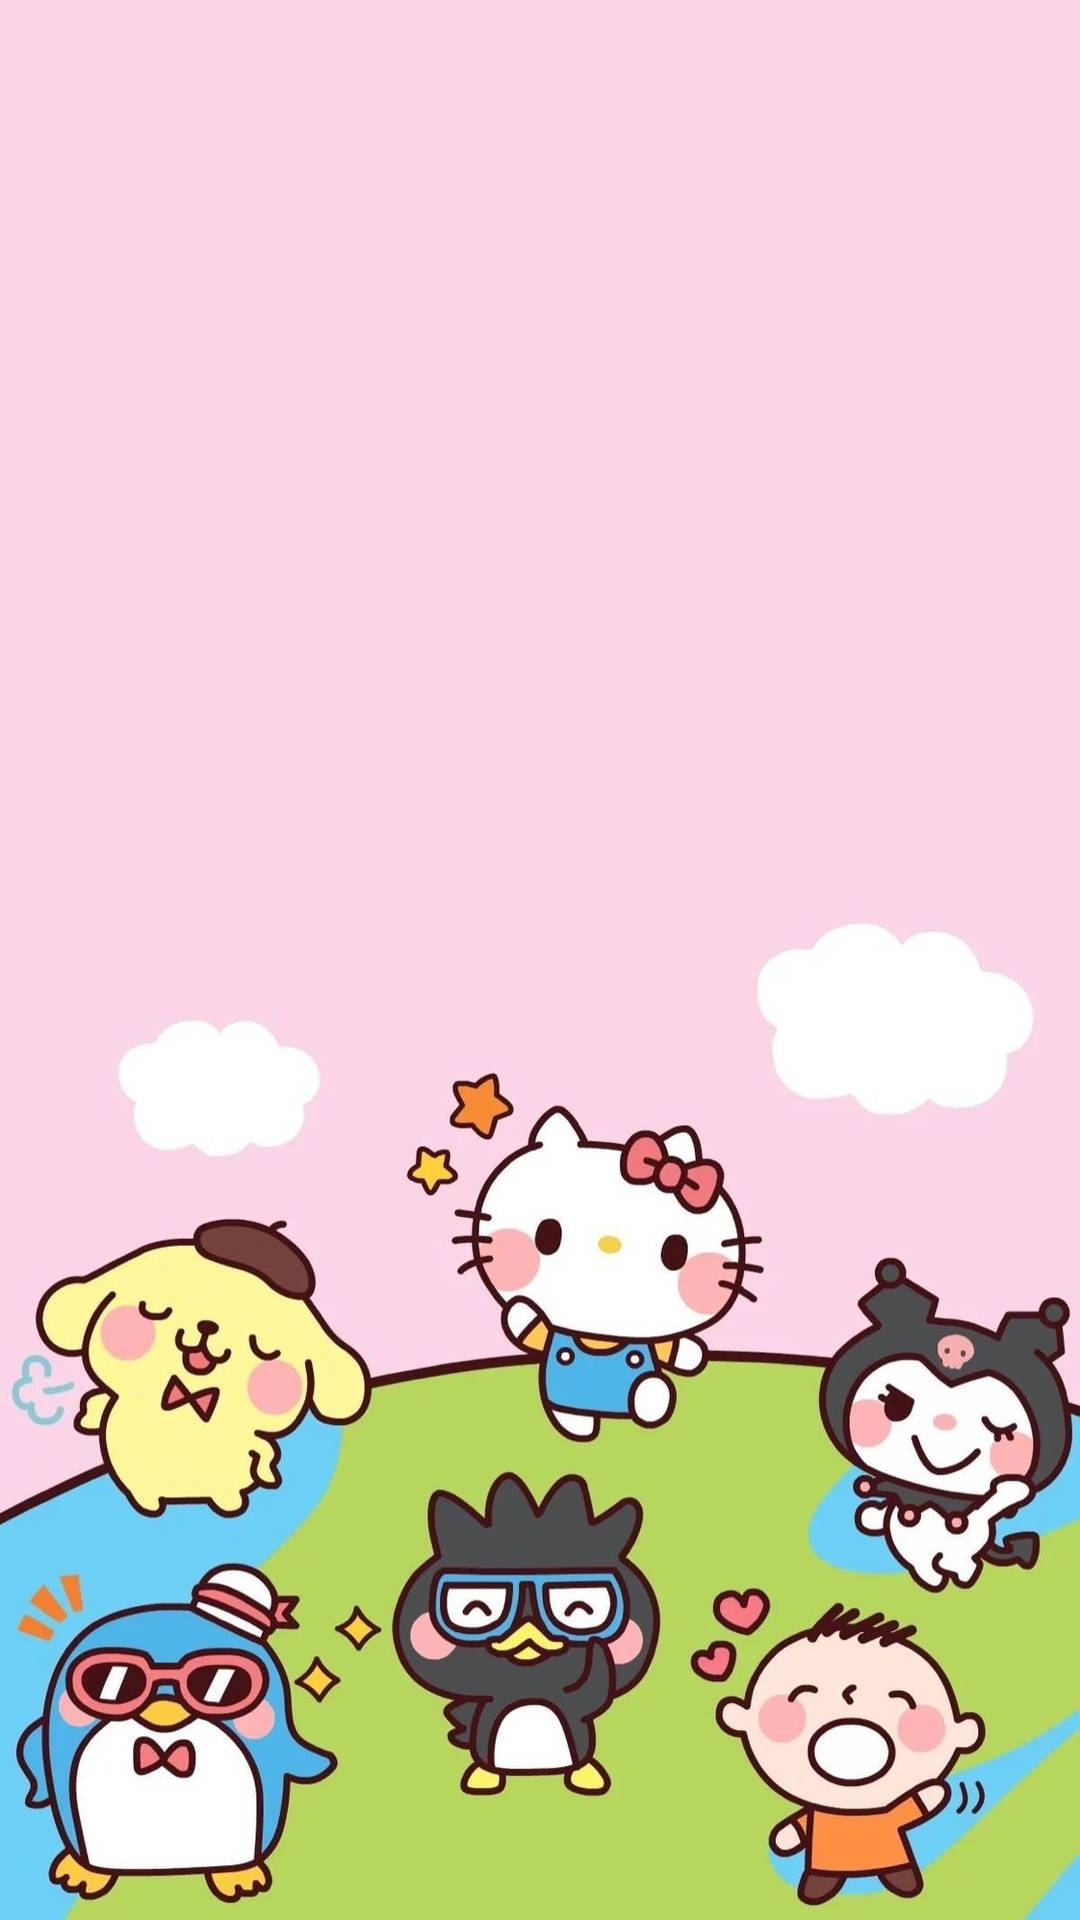 Sanrio Characters Above The Earth